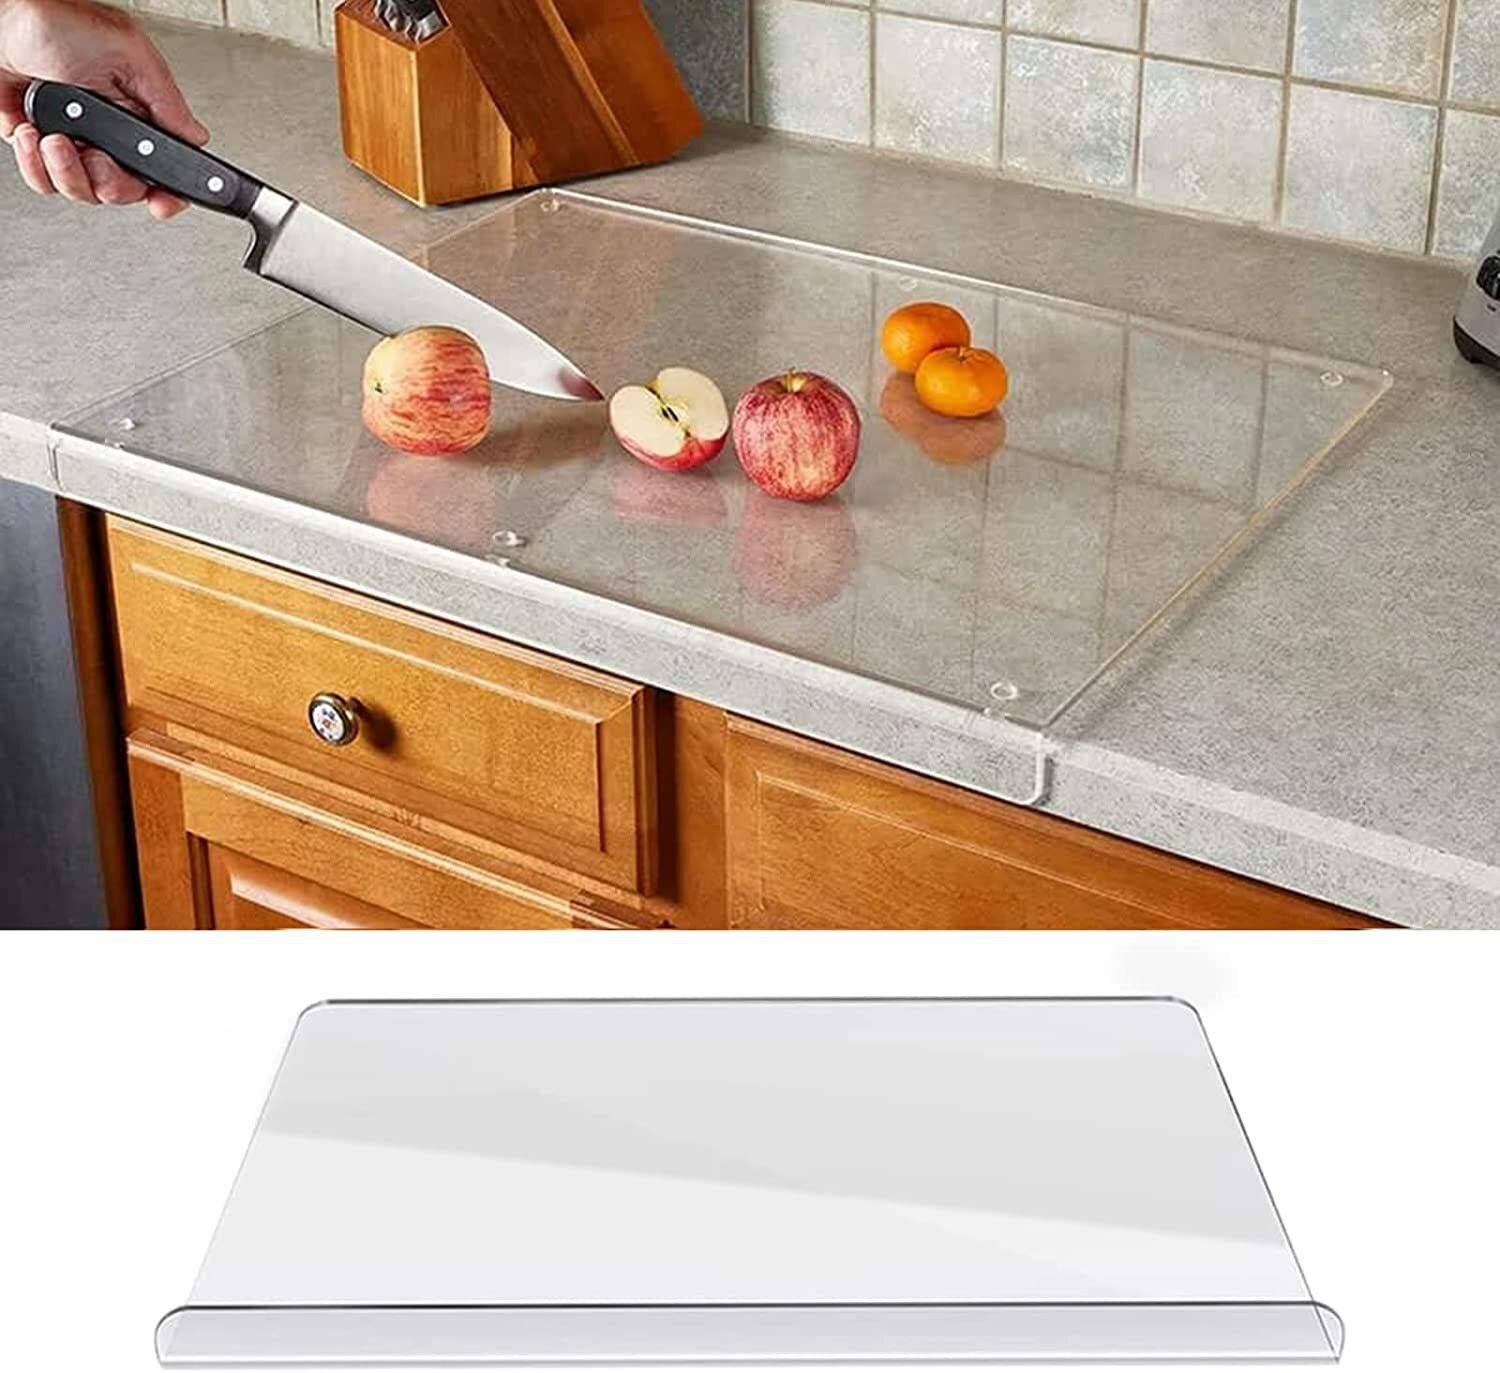 

45*40cm Acrylic Cutting Board With Counter Lip Clear Chopping Block For Kitchen Counter Non Slip Countertop Protector Ho